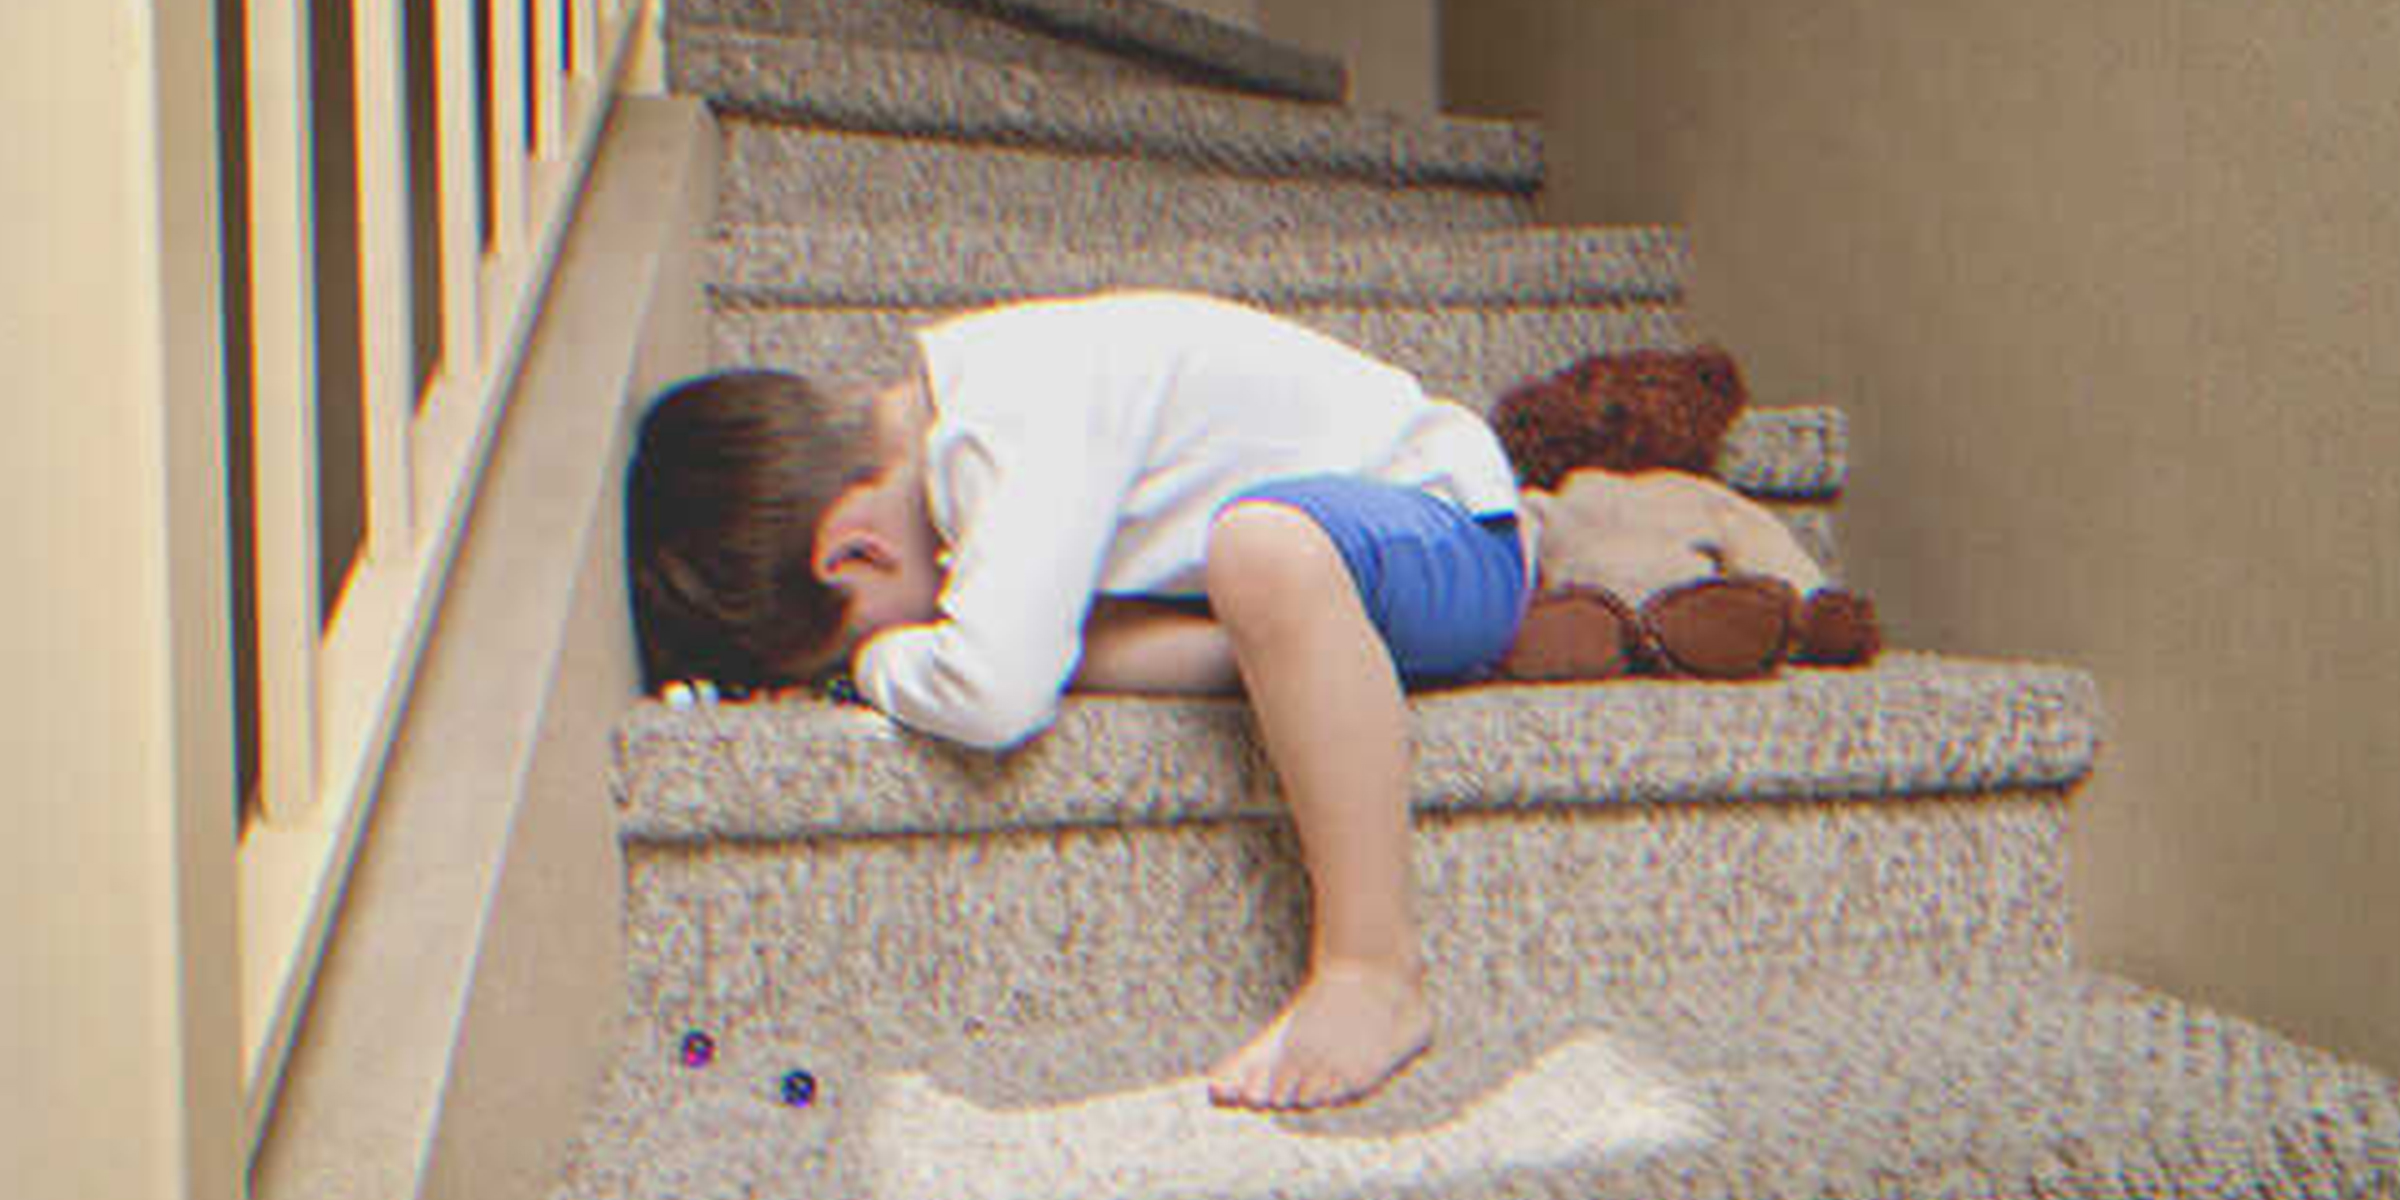 A boy crying on the stairs of the house | Source: Shutterstock